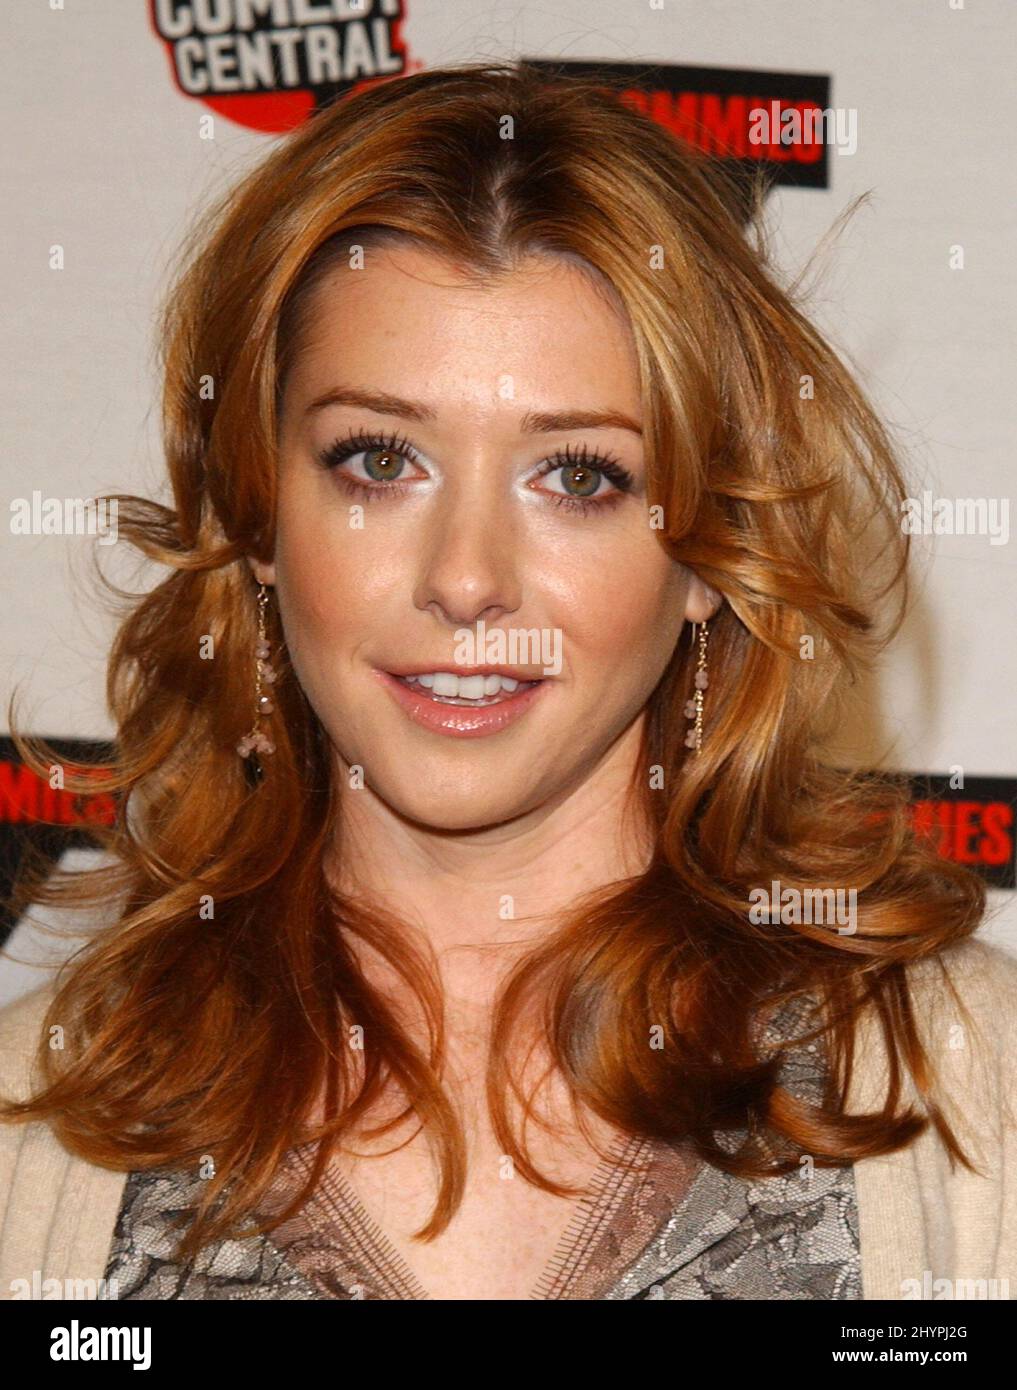 ALYSON HANNIGAN ATTENDS THE COMEDY CENTRAL'S FIRST ANNUAL COMMIE AWARDS IN CALIFORNIA. PICTURE: UK PRESS Stock Photo